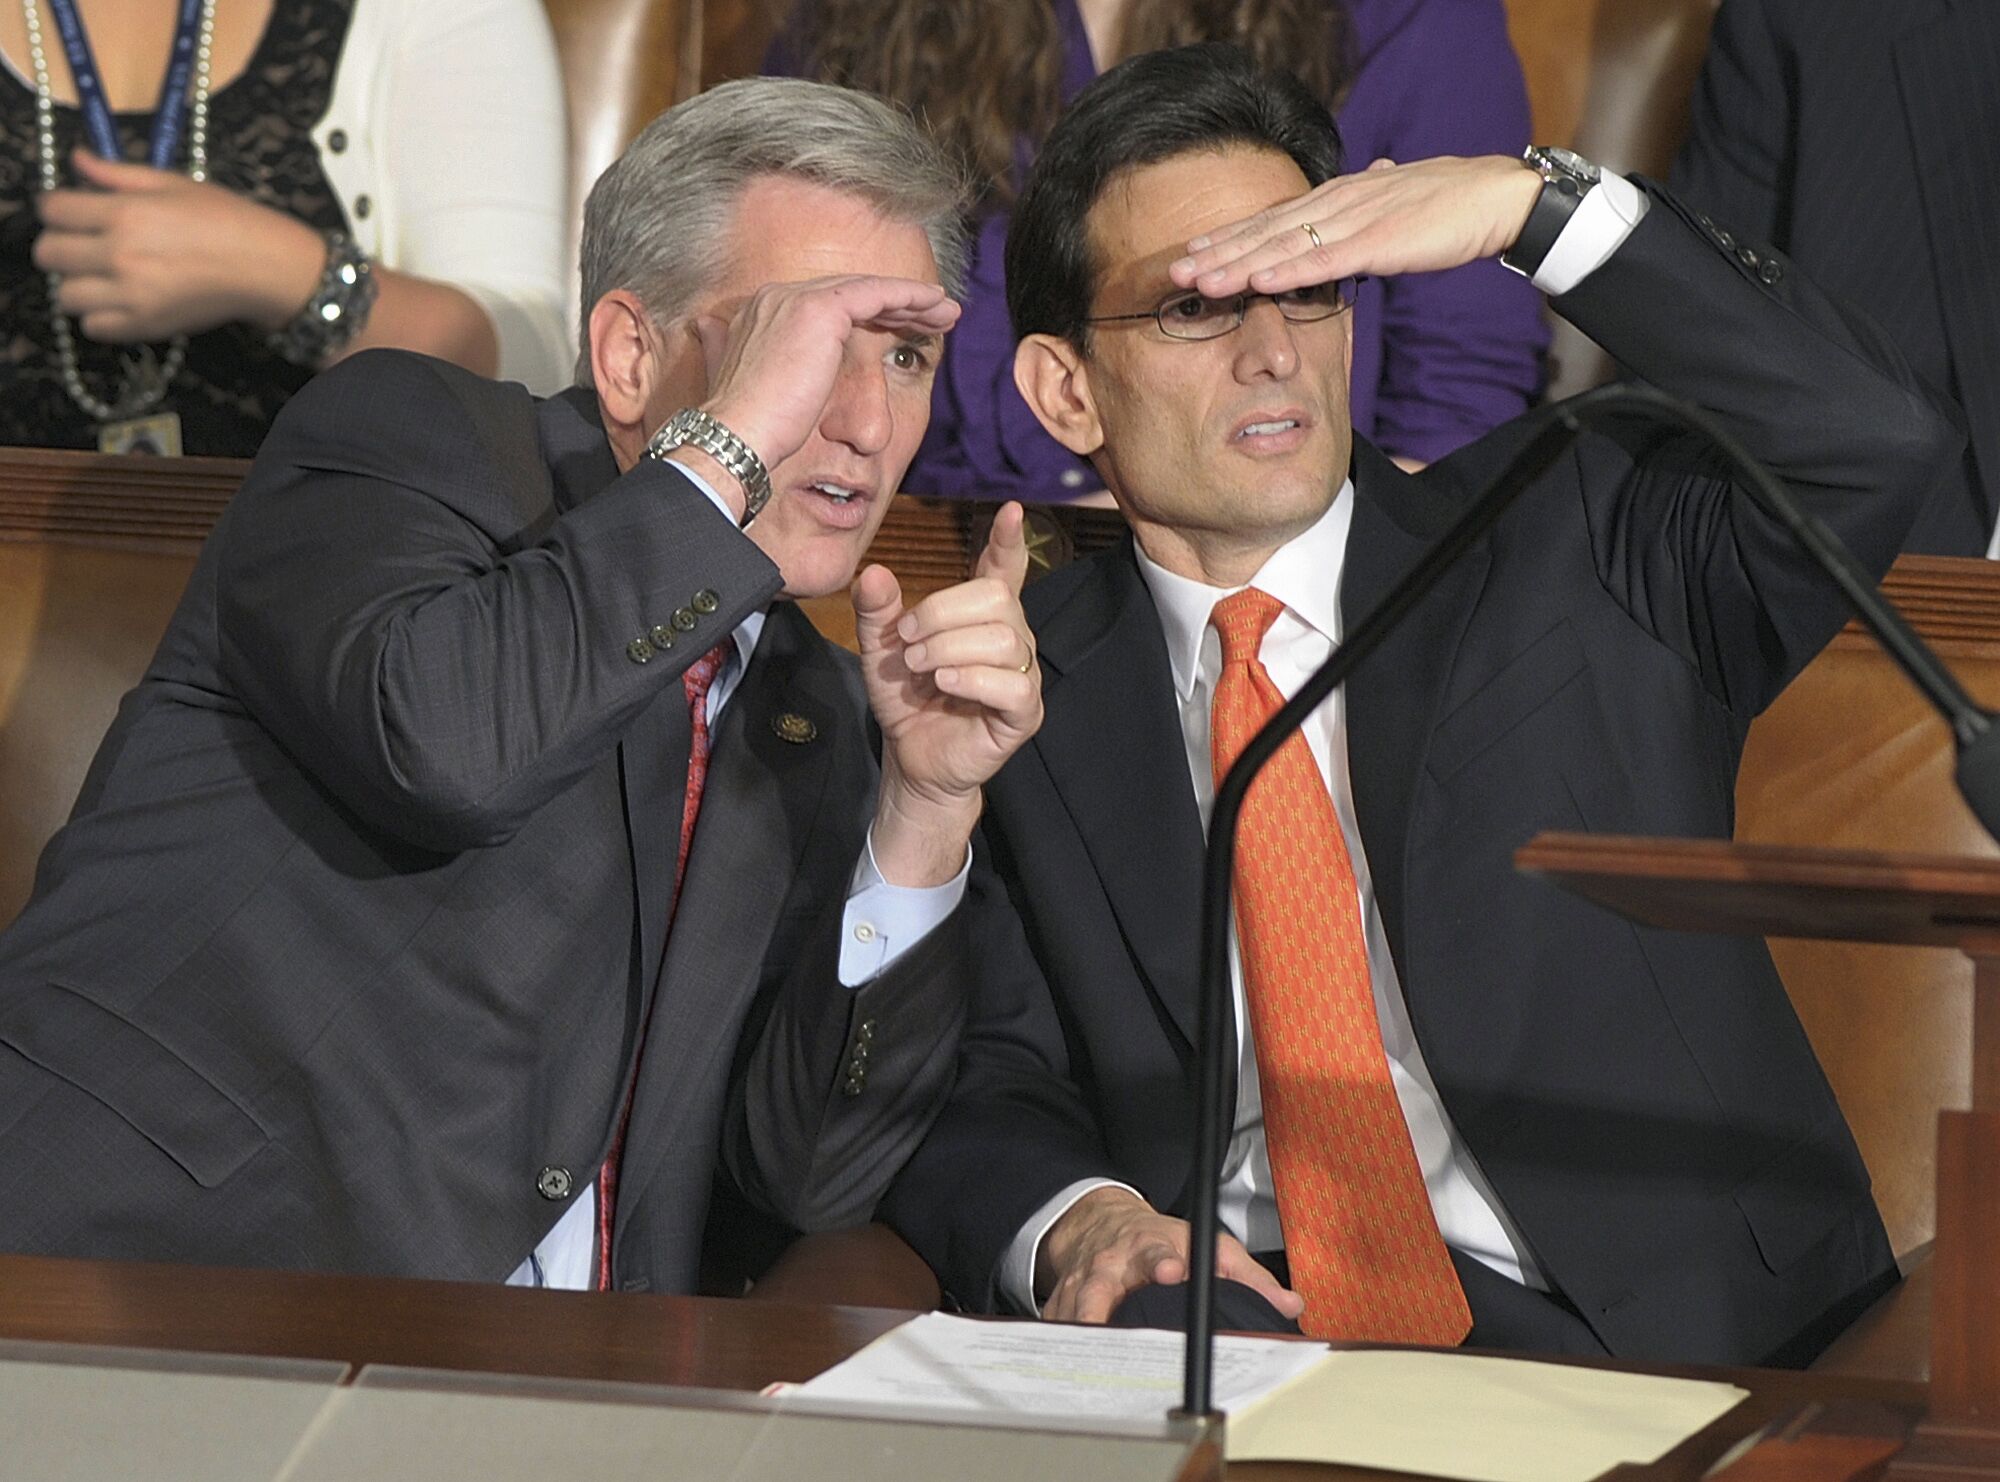  Eric Cantor of Va., right, and Kevin McCarthy of Calif. look across the House floor in 2011.